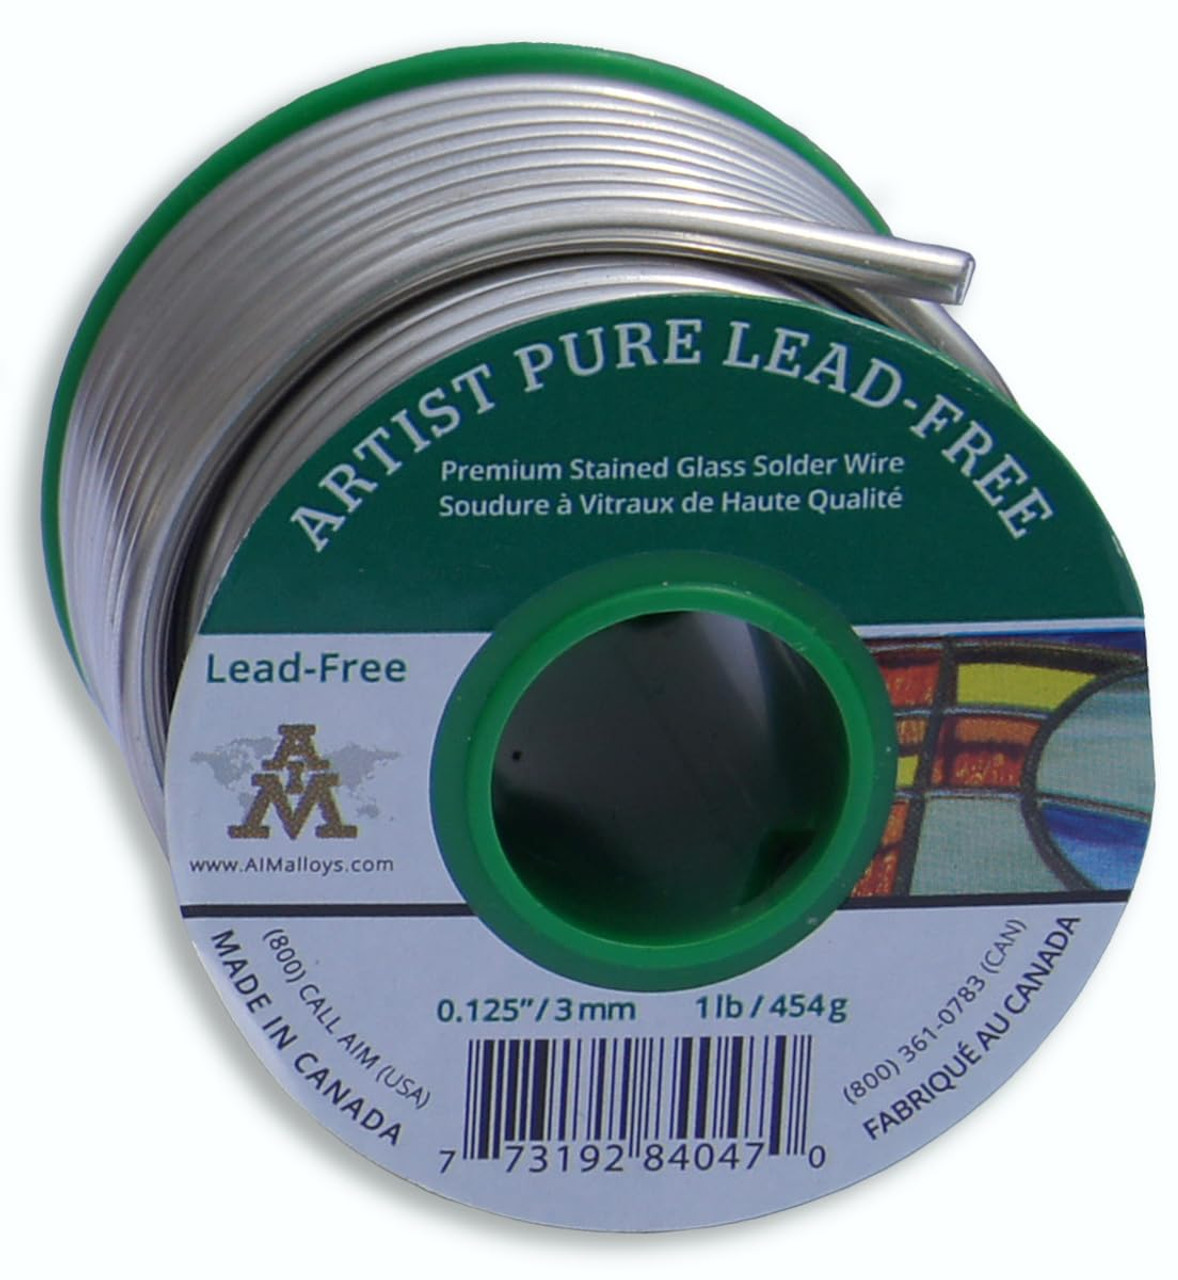 60/40 Stained Glass Solder 1 lb Spool 1/8 Dia. Free Shipping 25